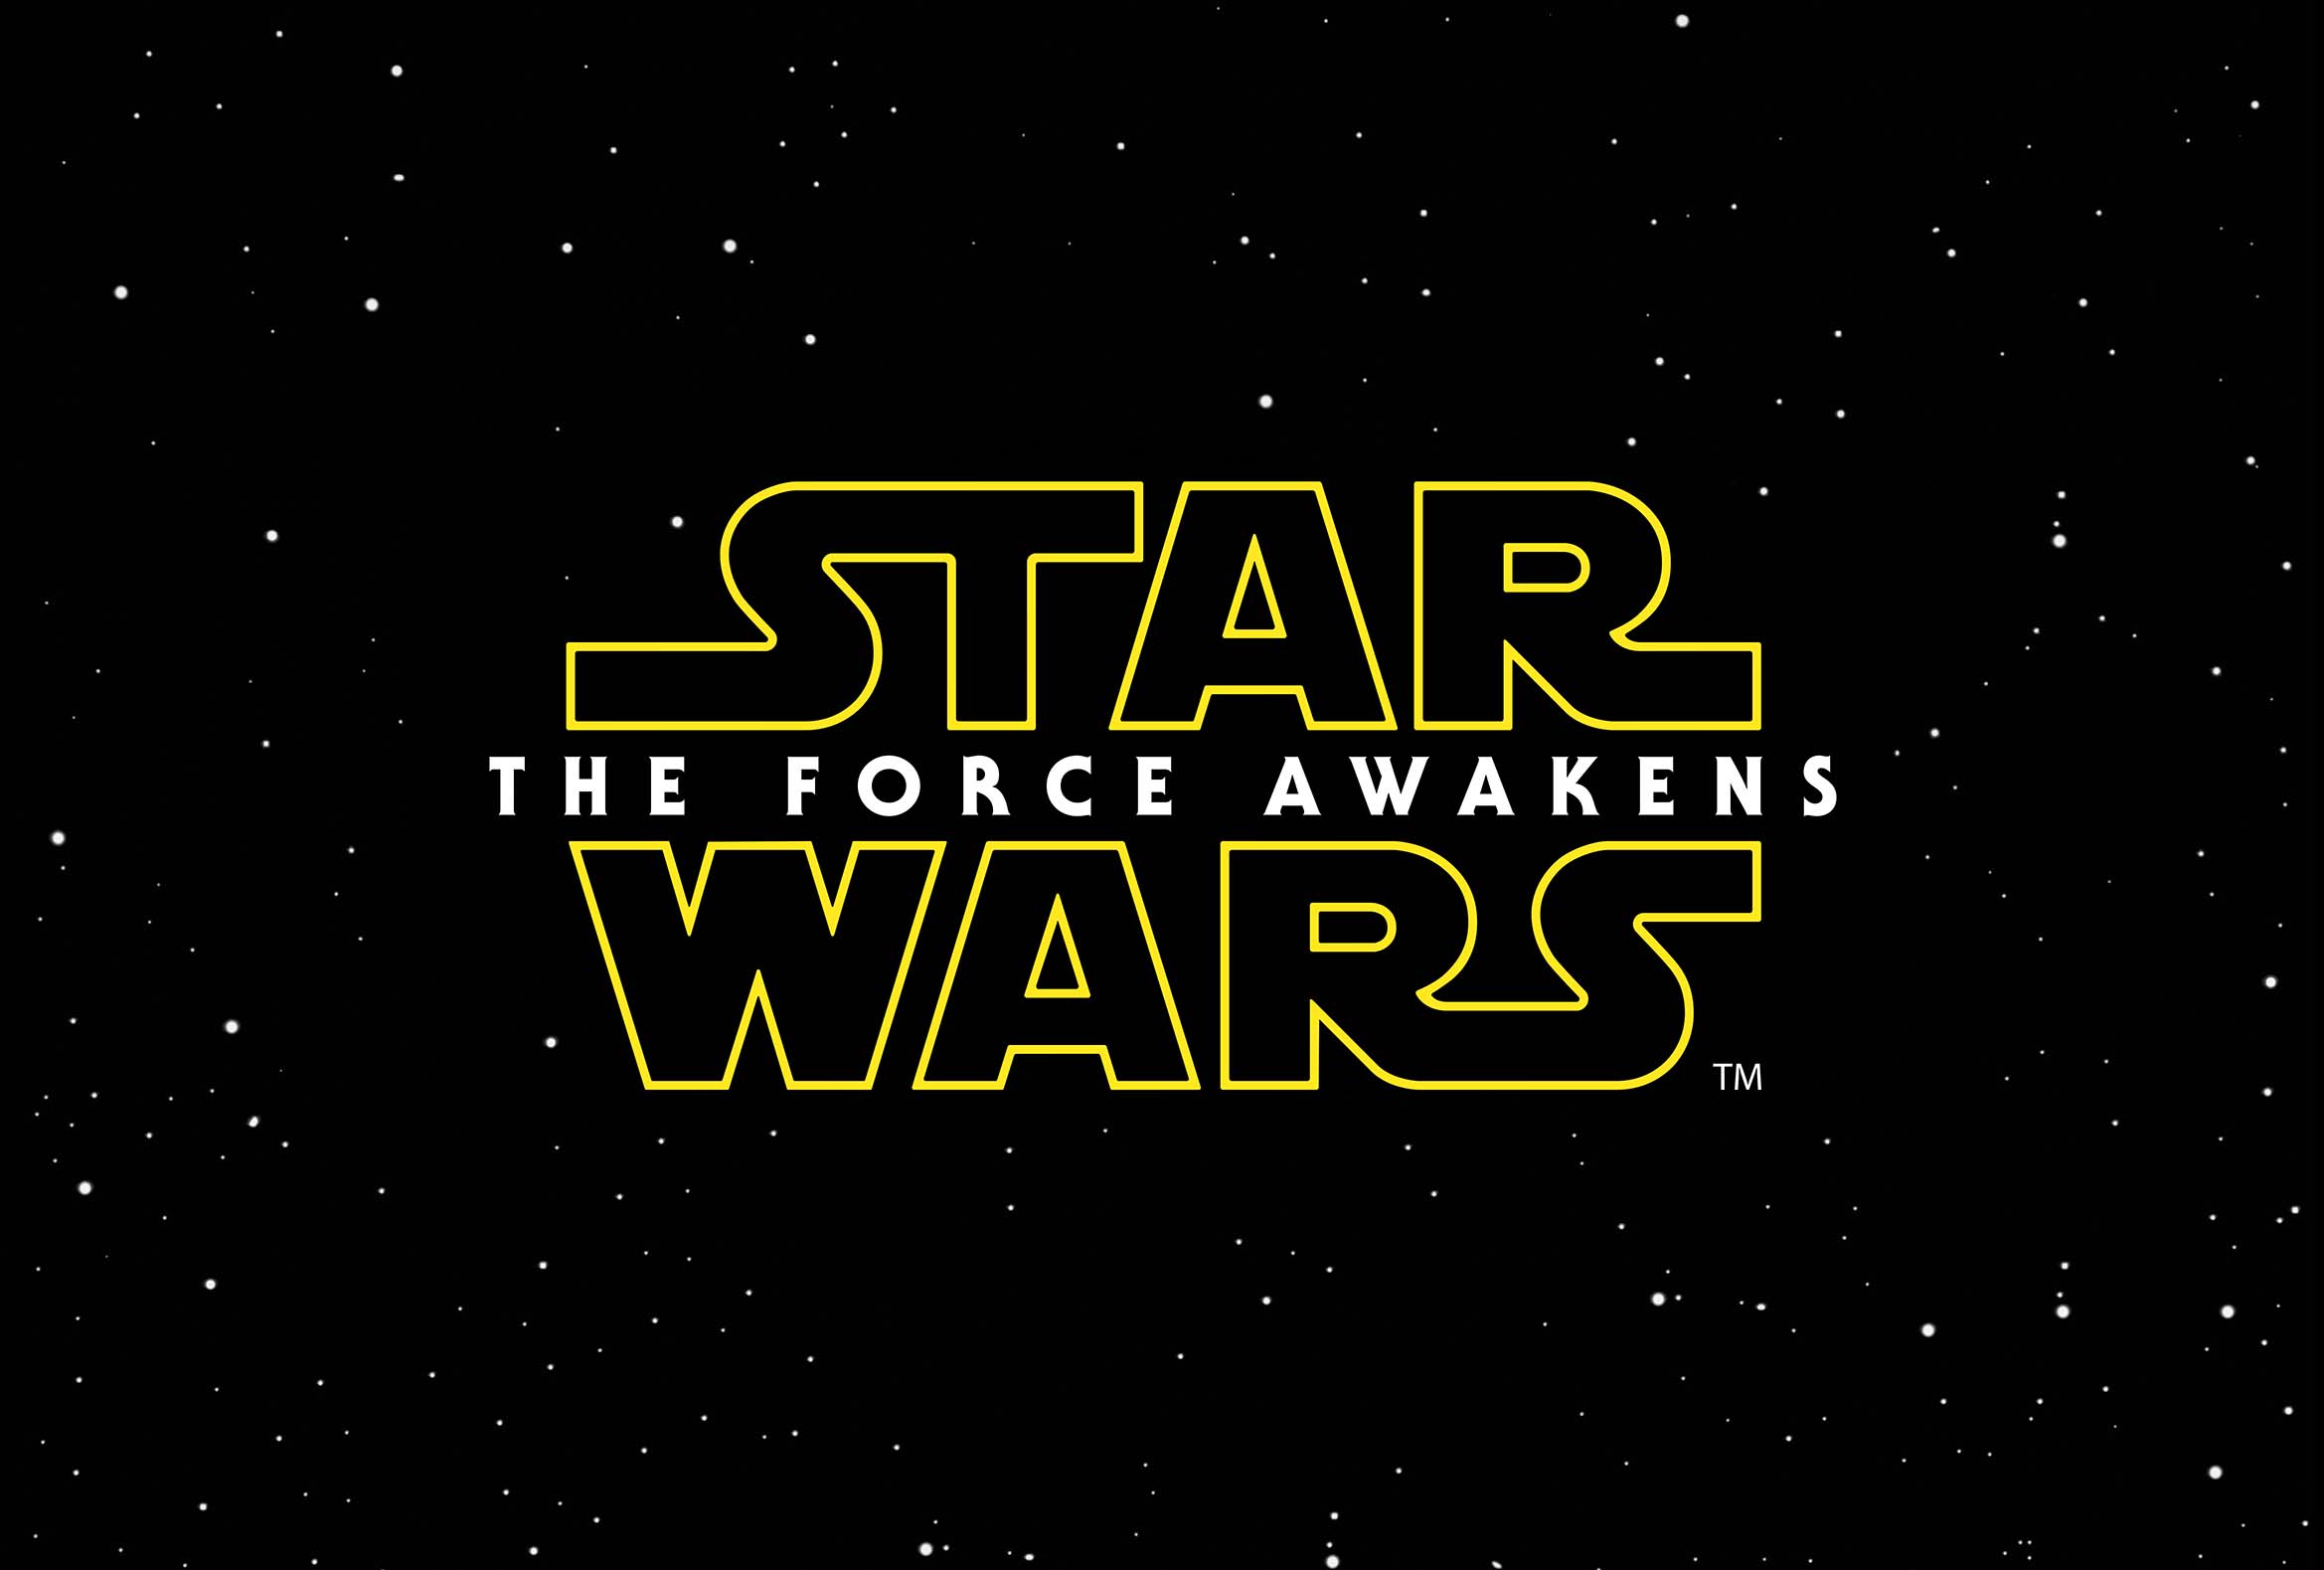 Bring Home Star Wars: The Force Awakens on Digital HD April 1st and Blu-ray April 5th